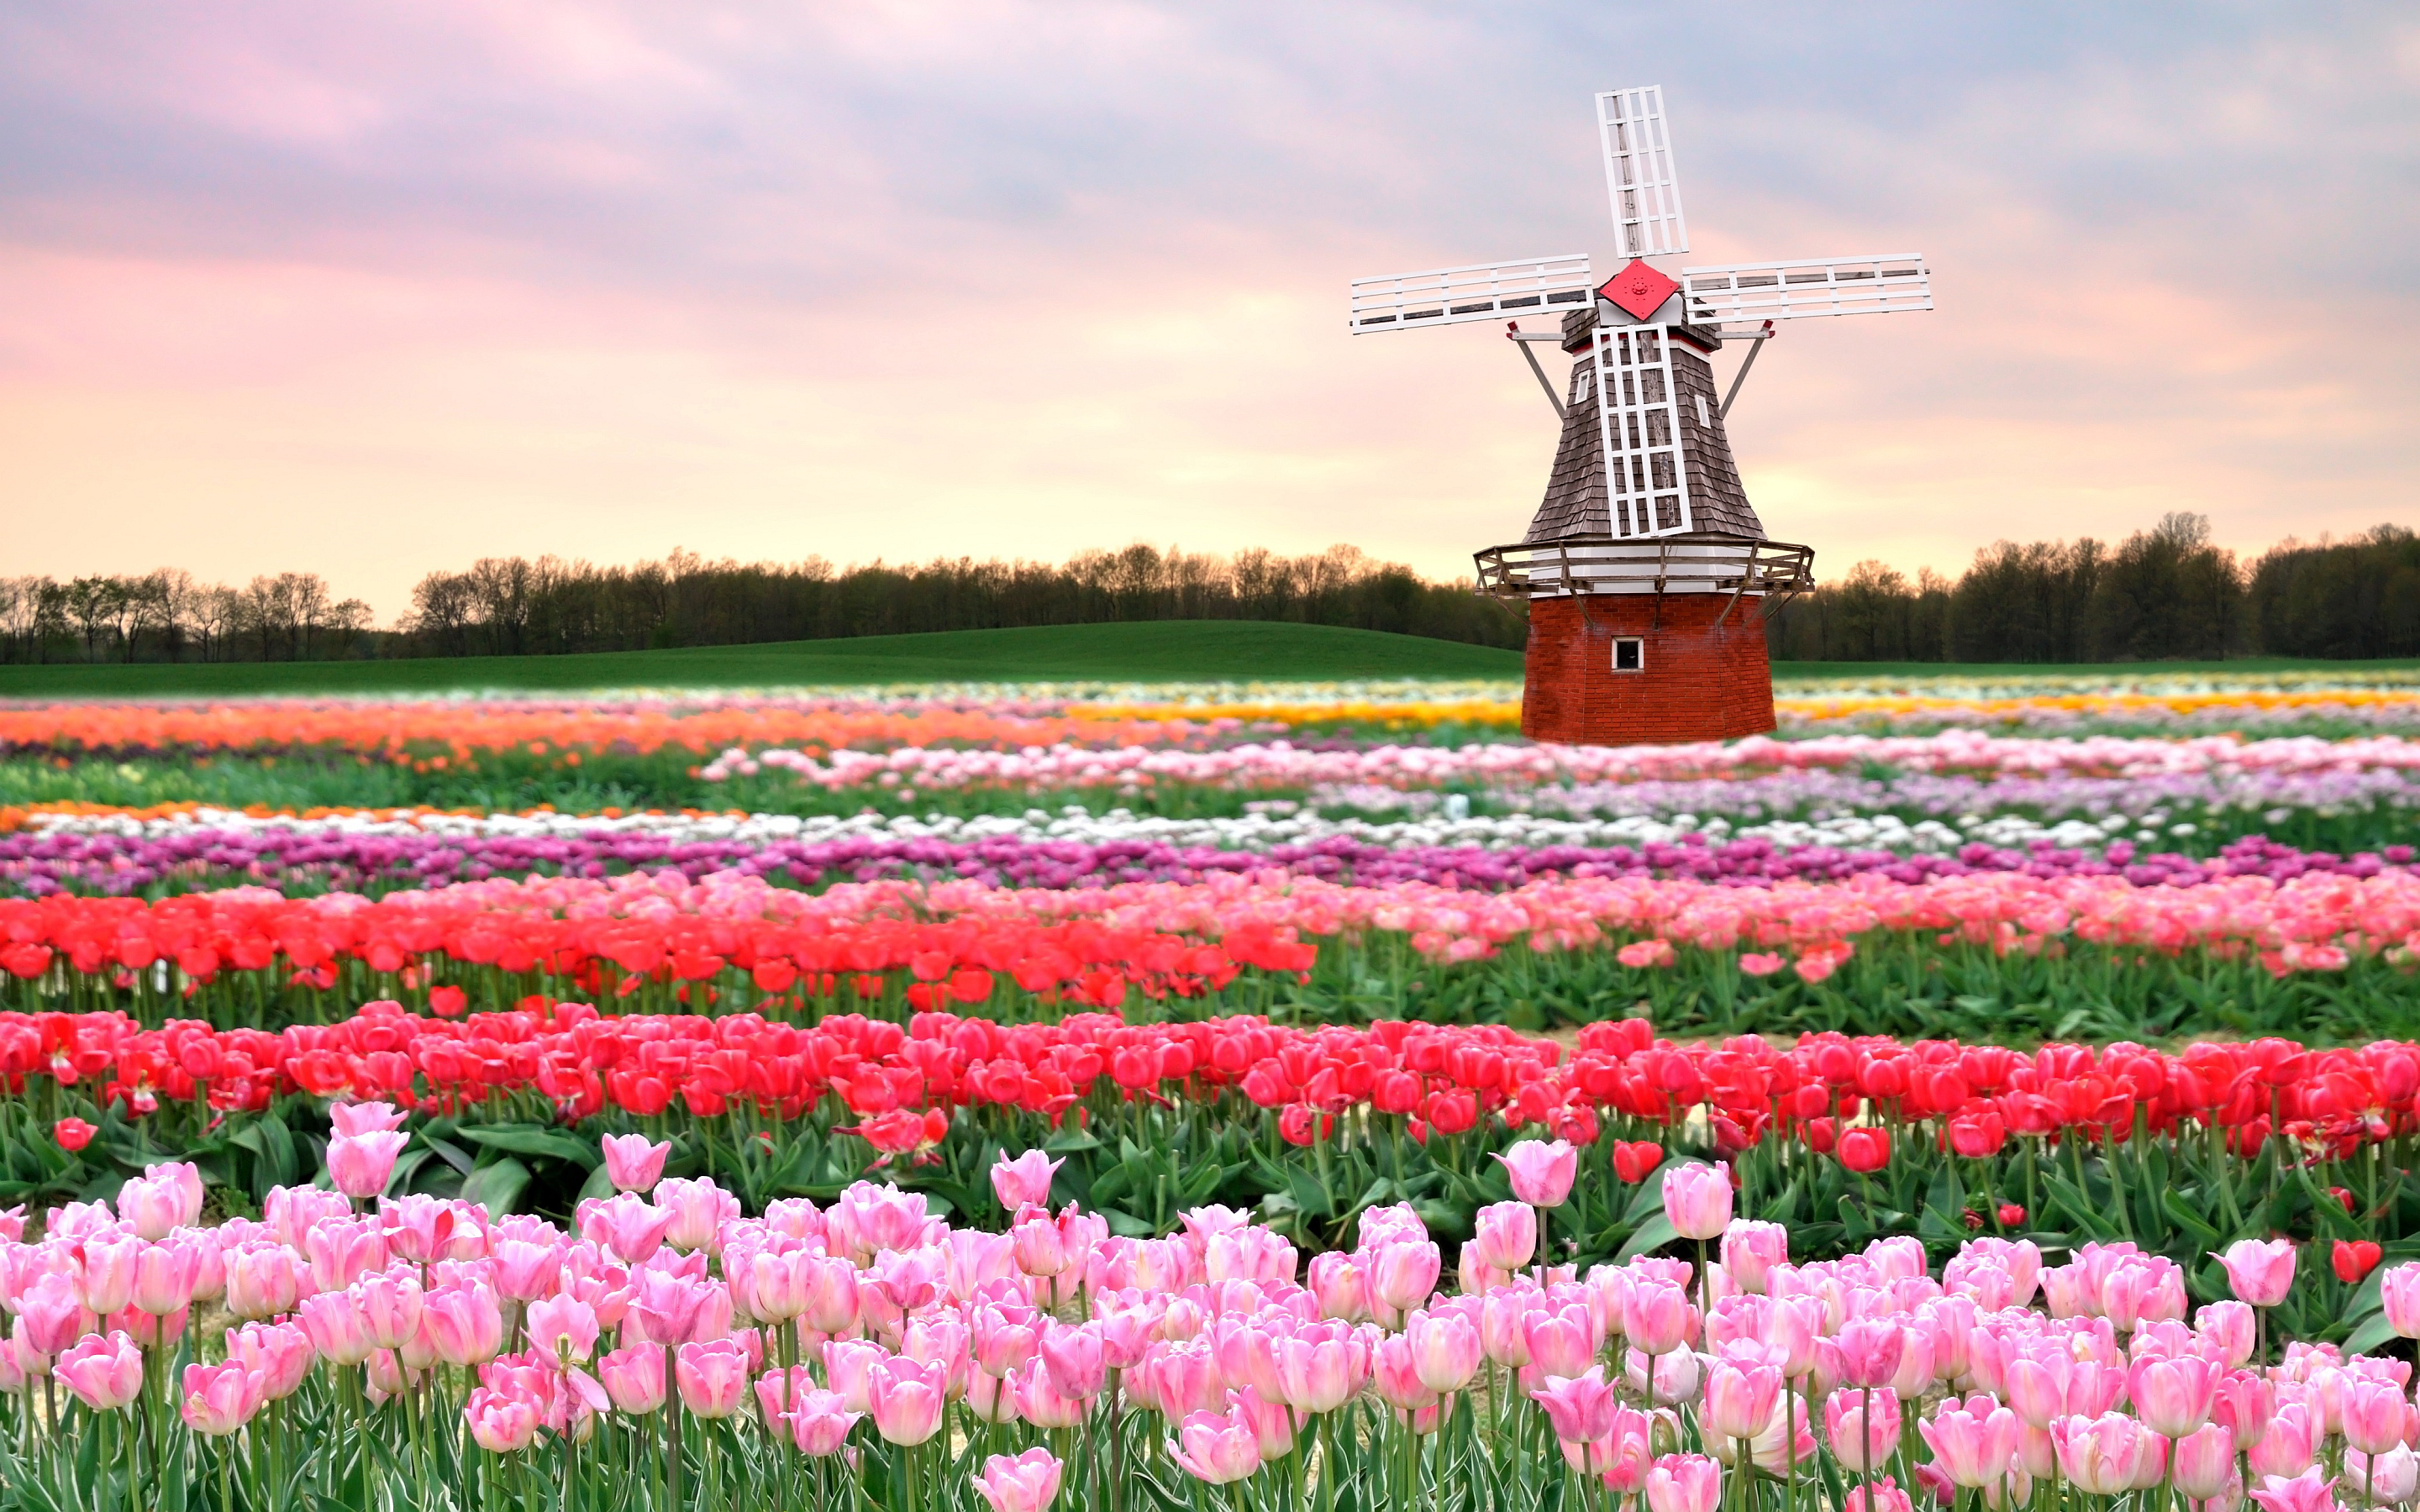 Spring in the Netherlands: the Tulipomania!